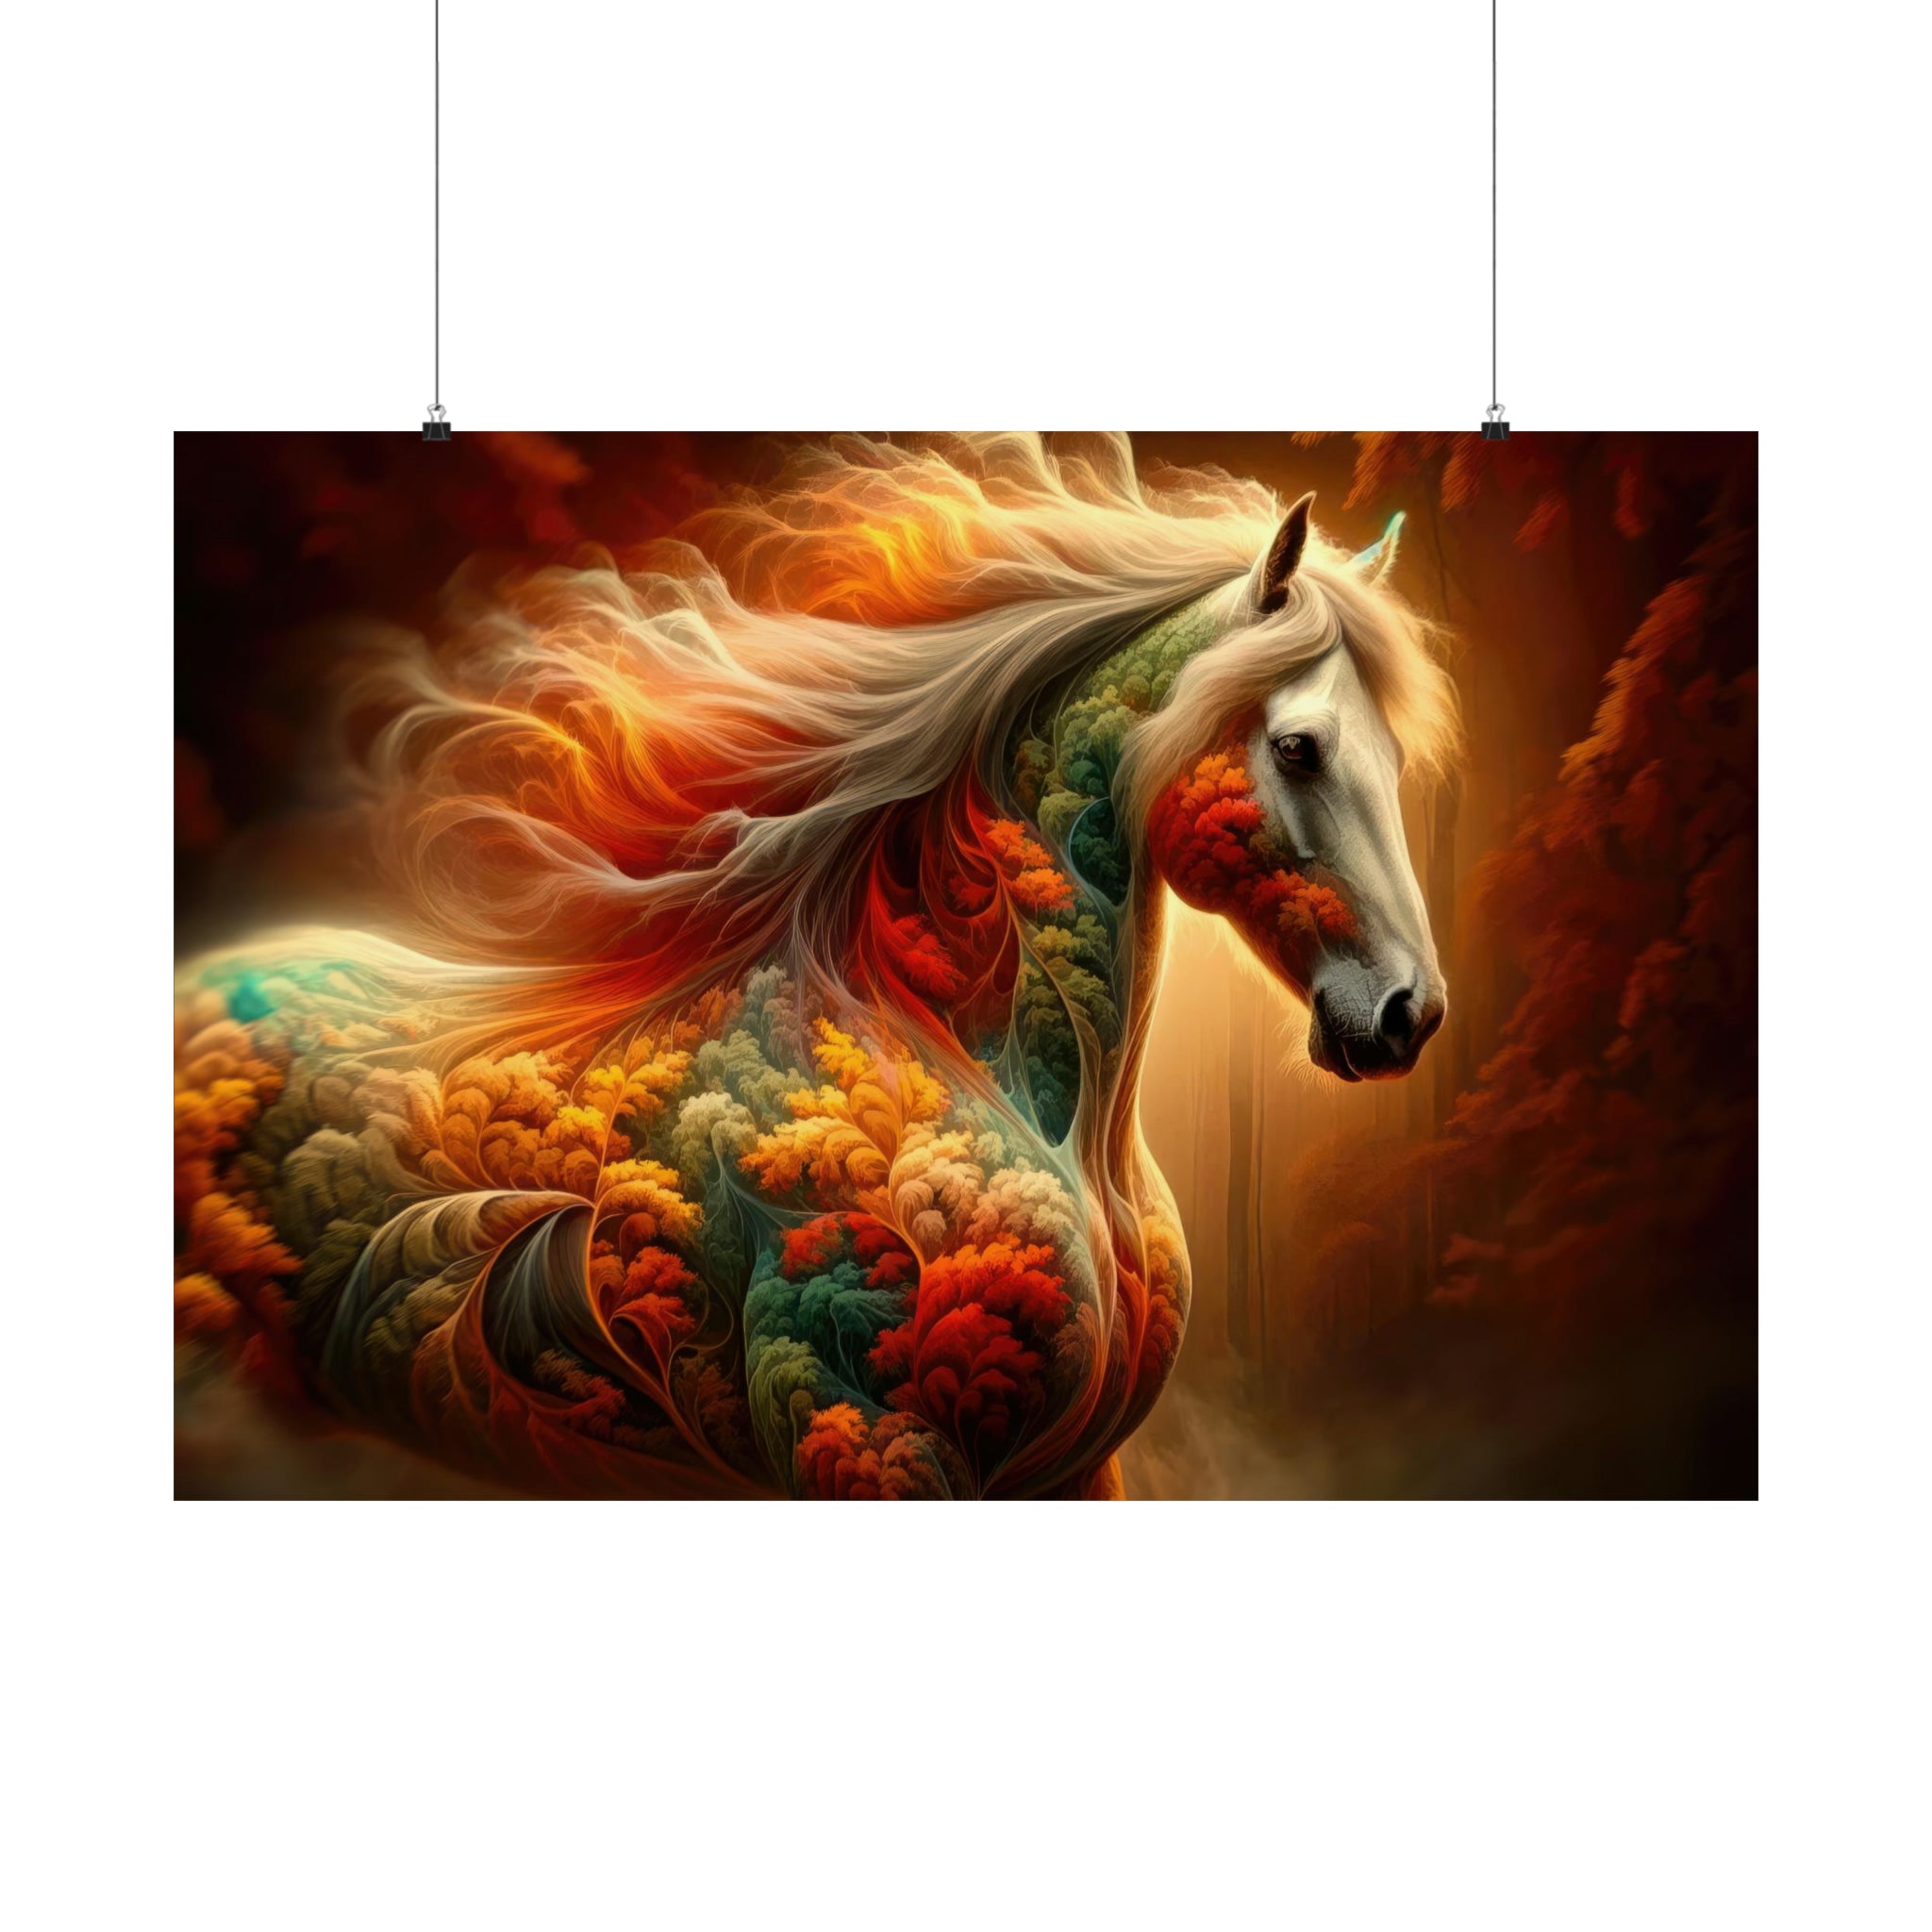 The Equine Illusion Poster